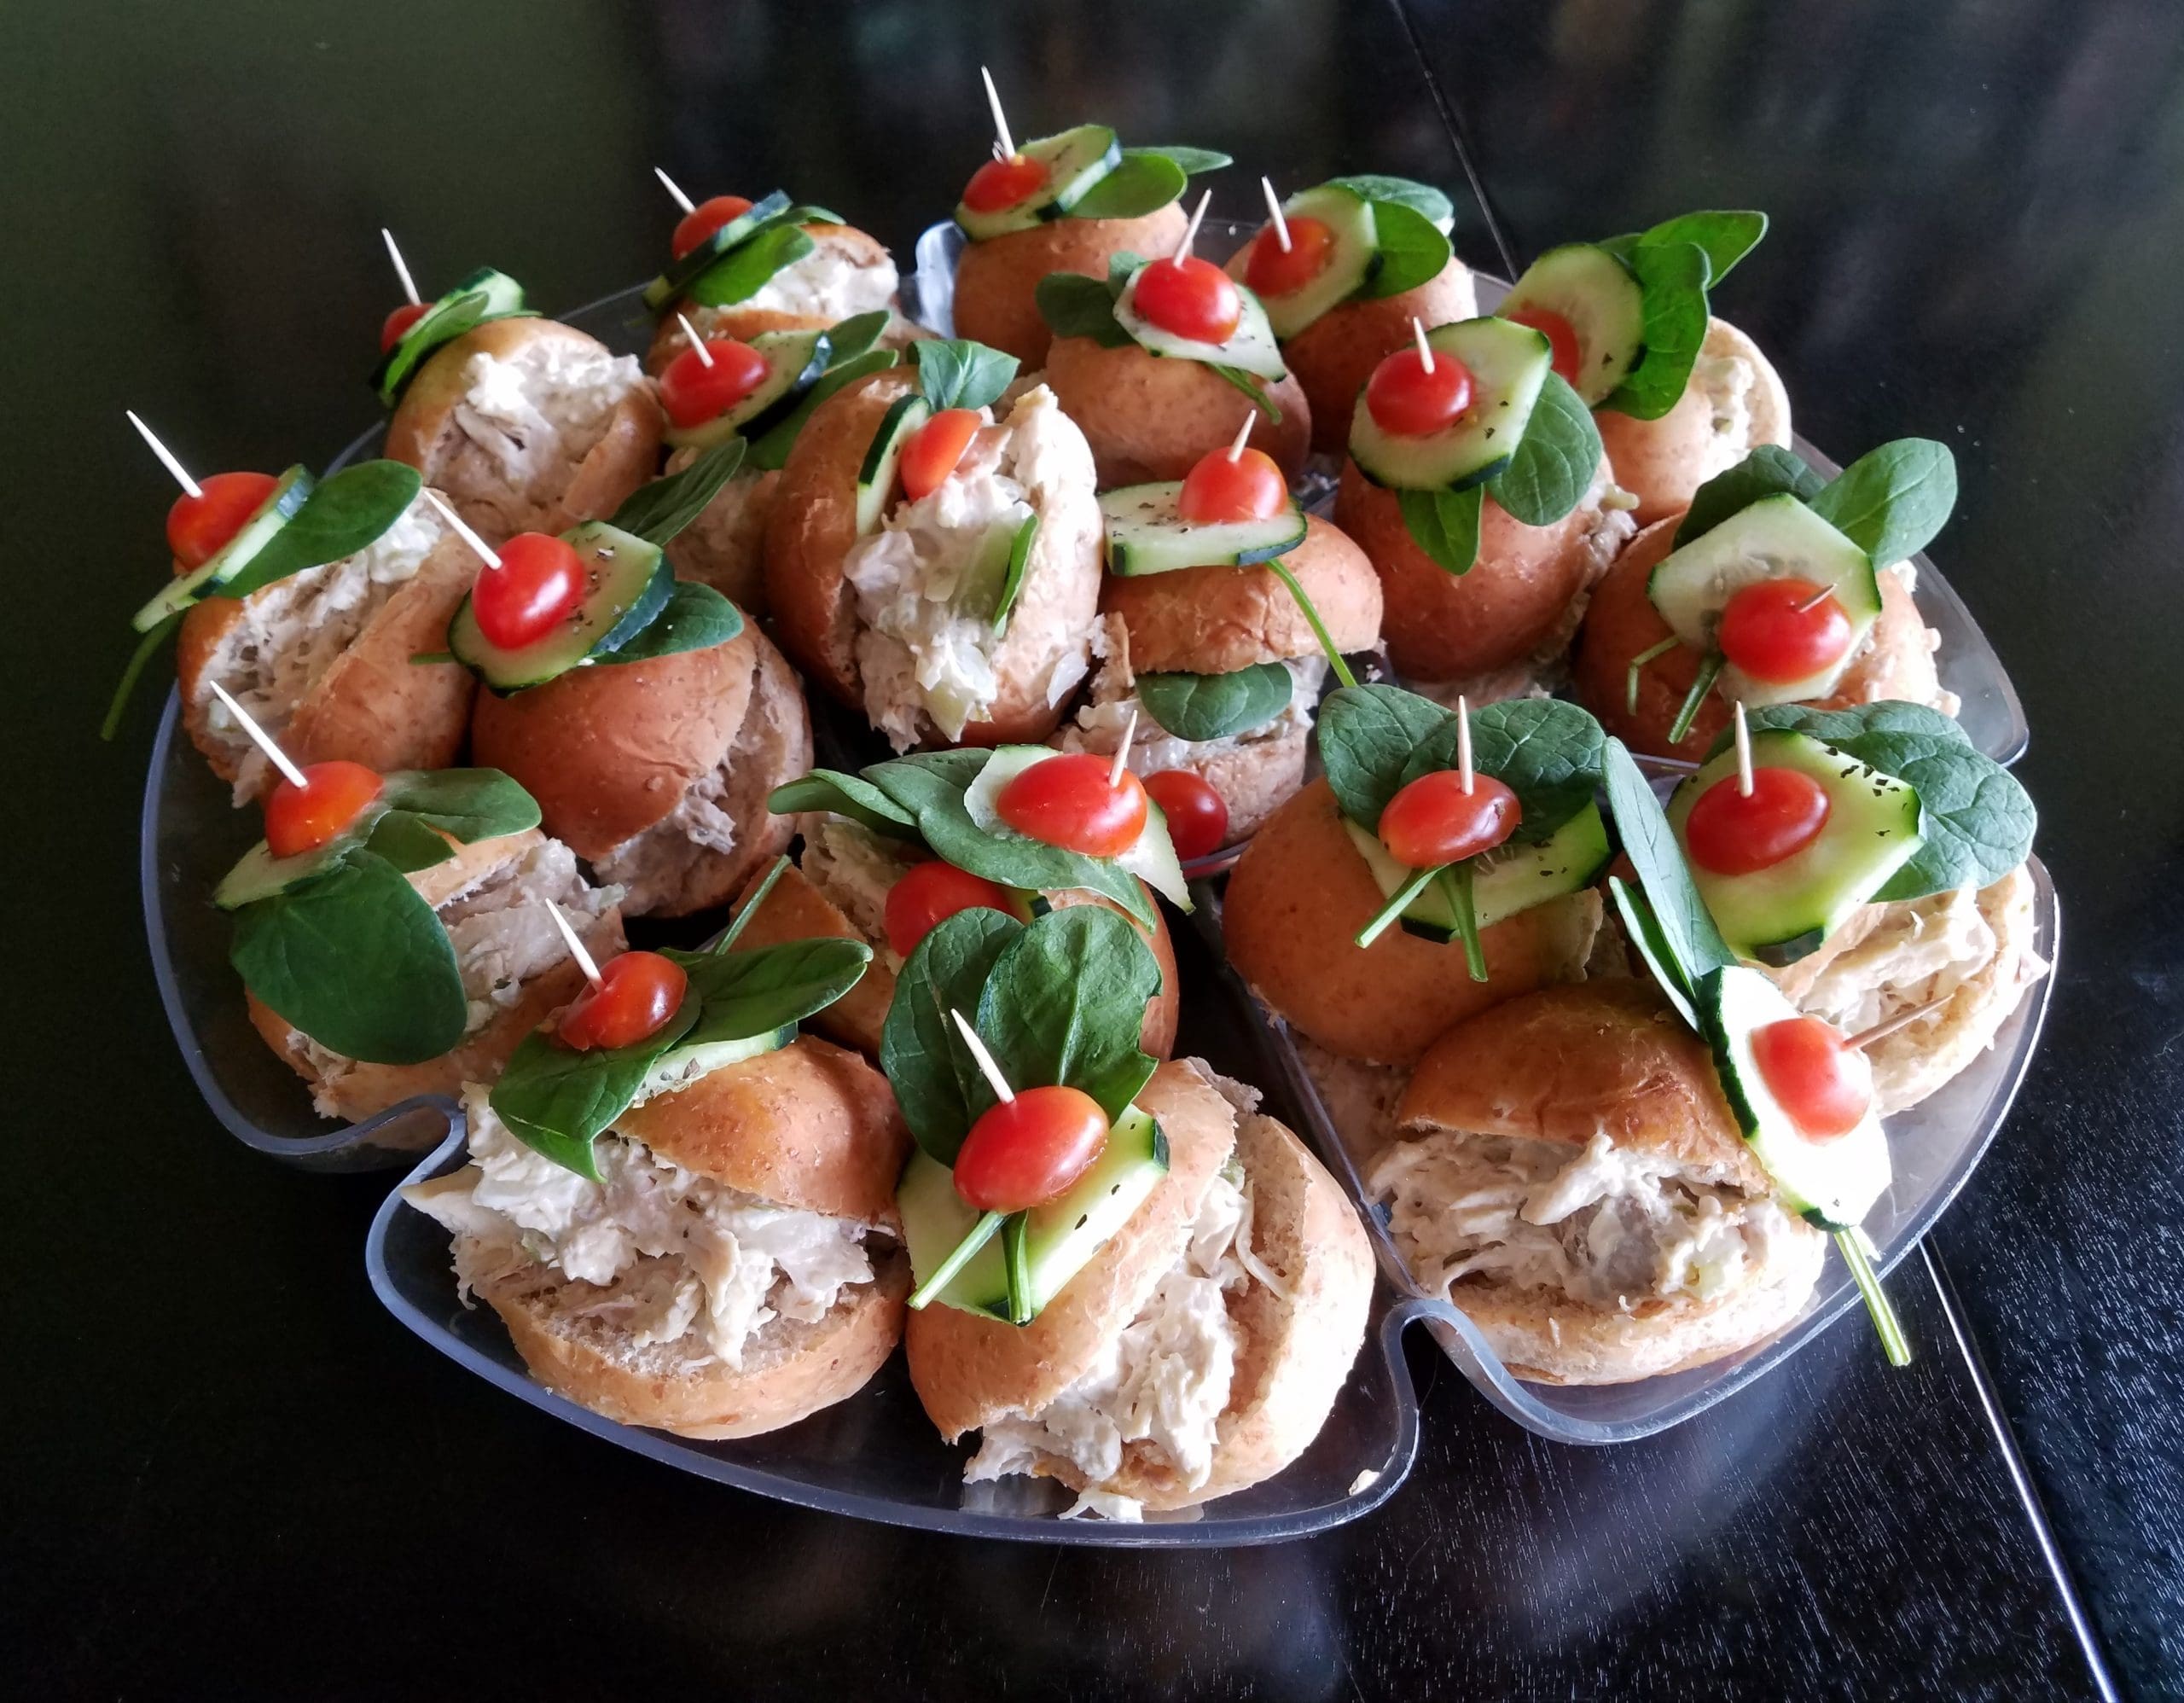 Catering sliders tray